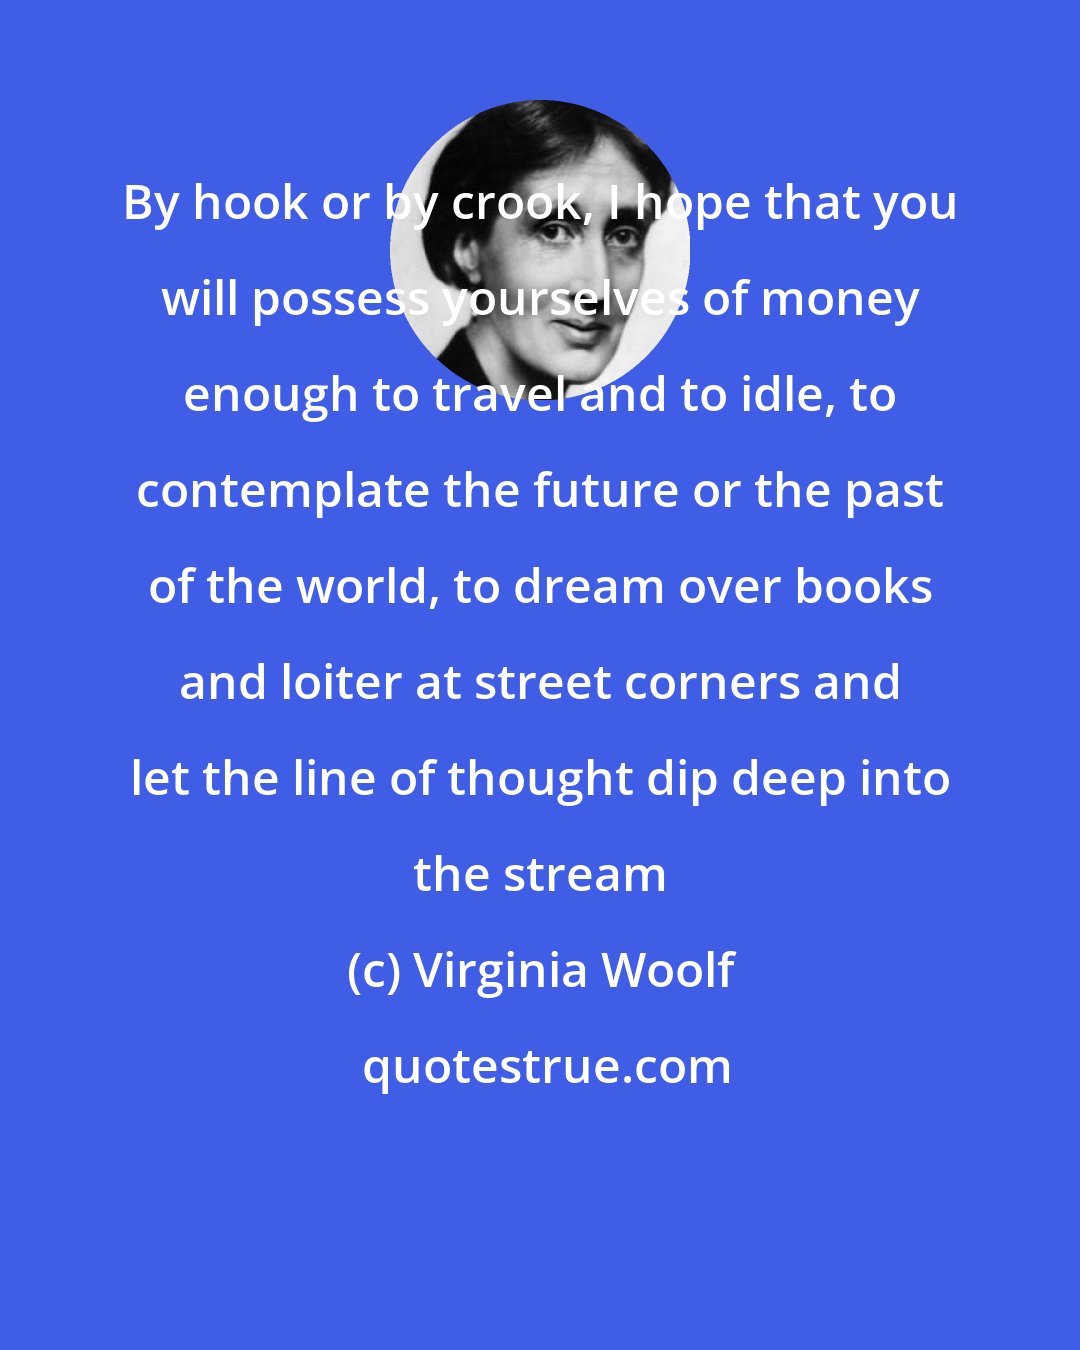 Virginia Woolf: By hook or by crook, I hope that you will possess yourselves of money enough to travel and to idle, to contemplate the future or the past of the world, to dream over books and loiter at street corners and let the line of thought dip deep into the stream